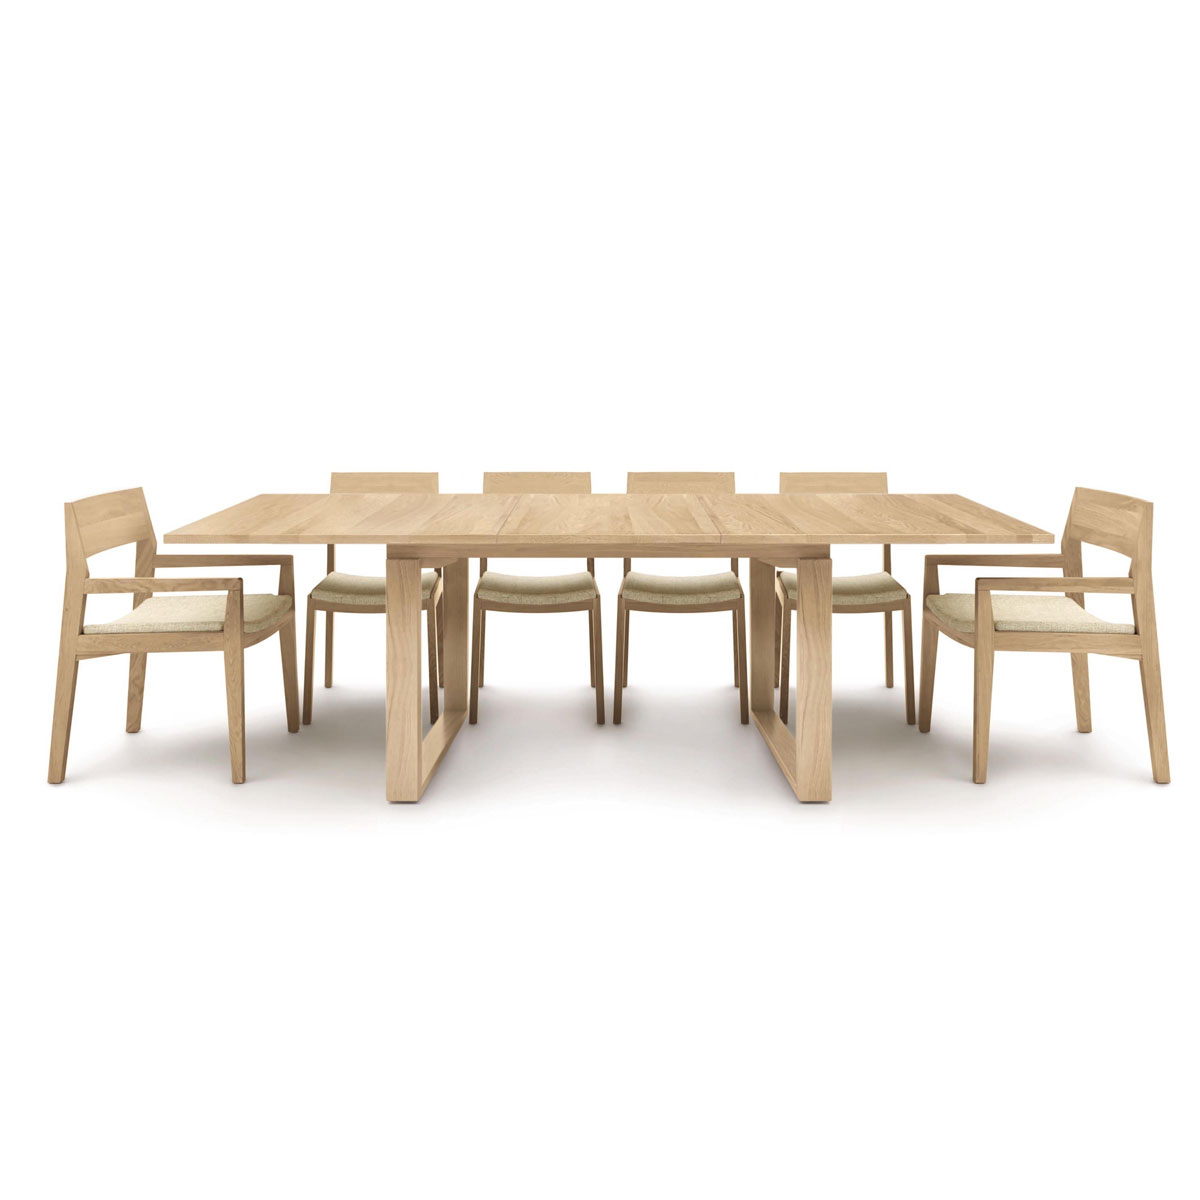 Copeland Iso 42" x 72" Extension Dining Table setting